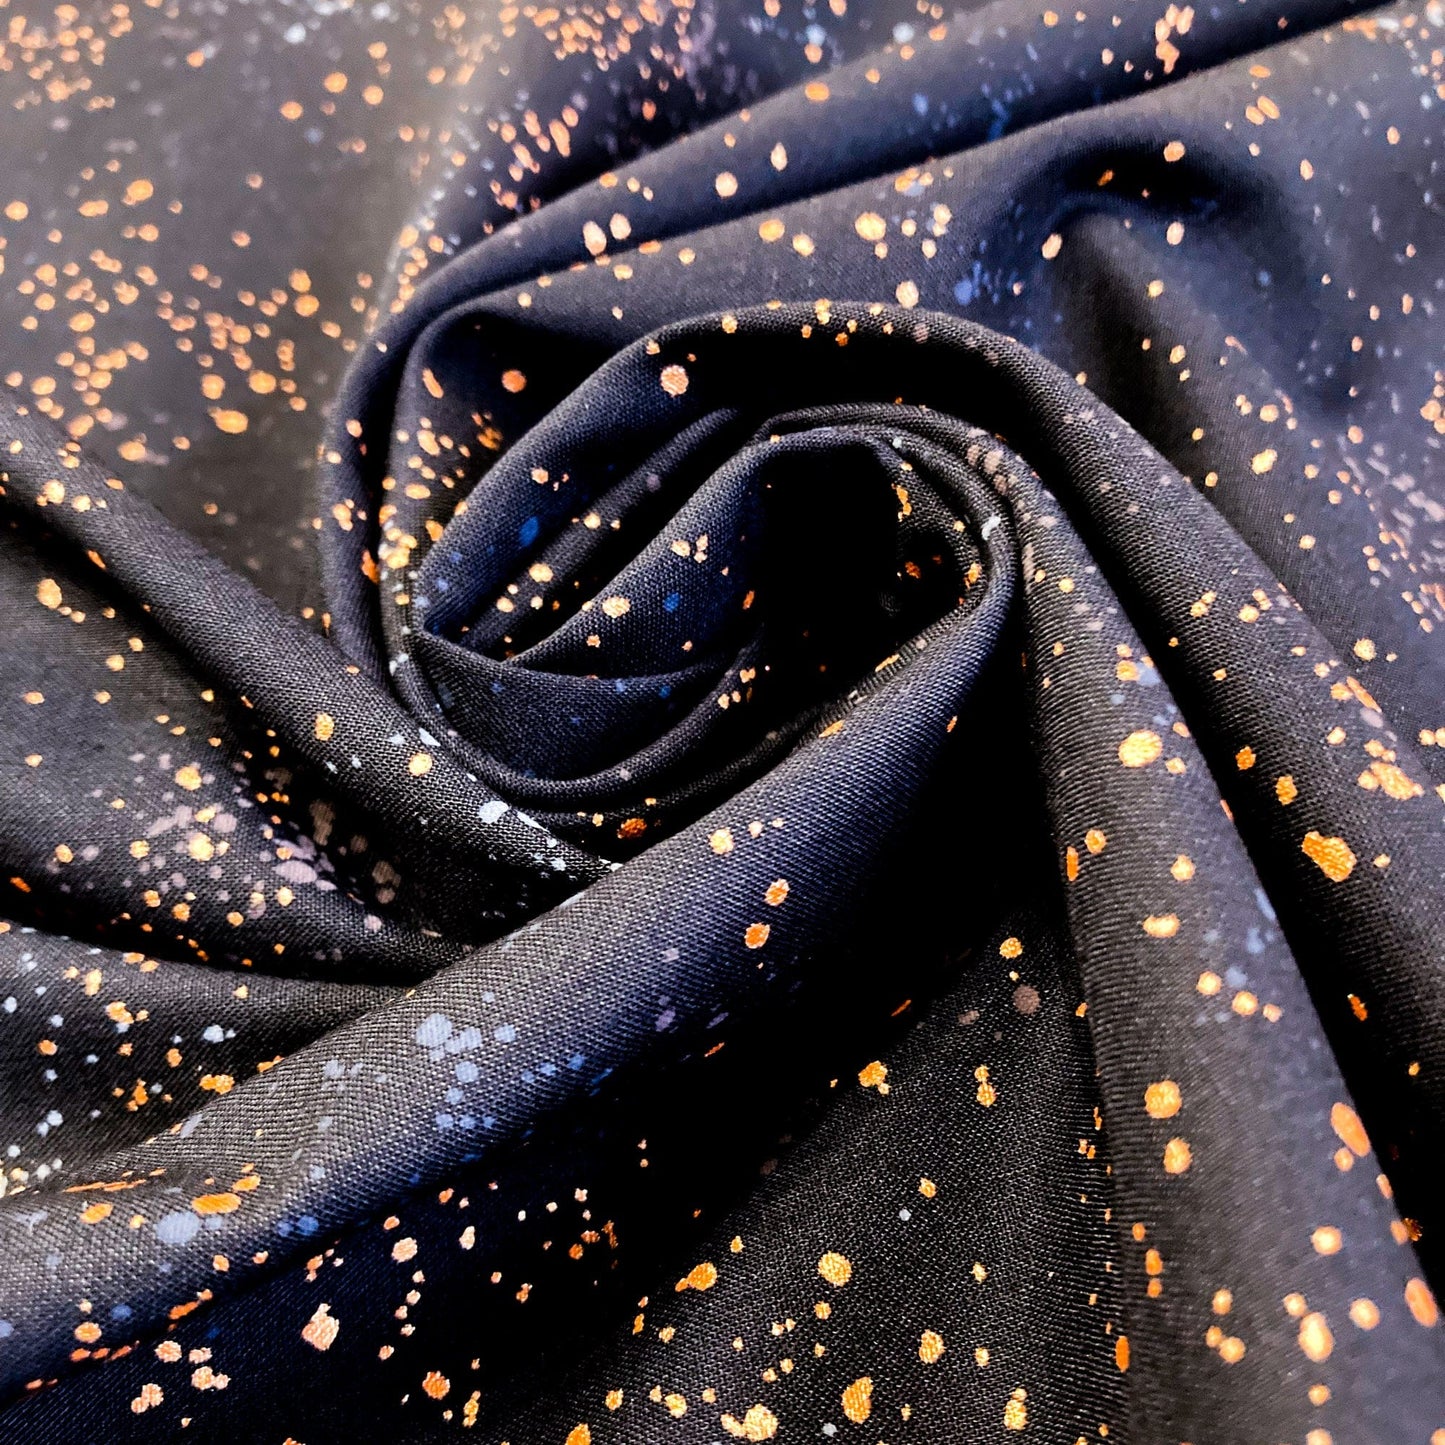 Ruby Star Society 'Speckled' Quilting Cotton in 'Black' (Metallic)